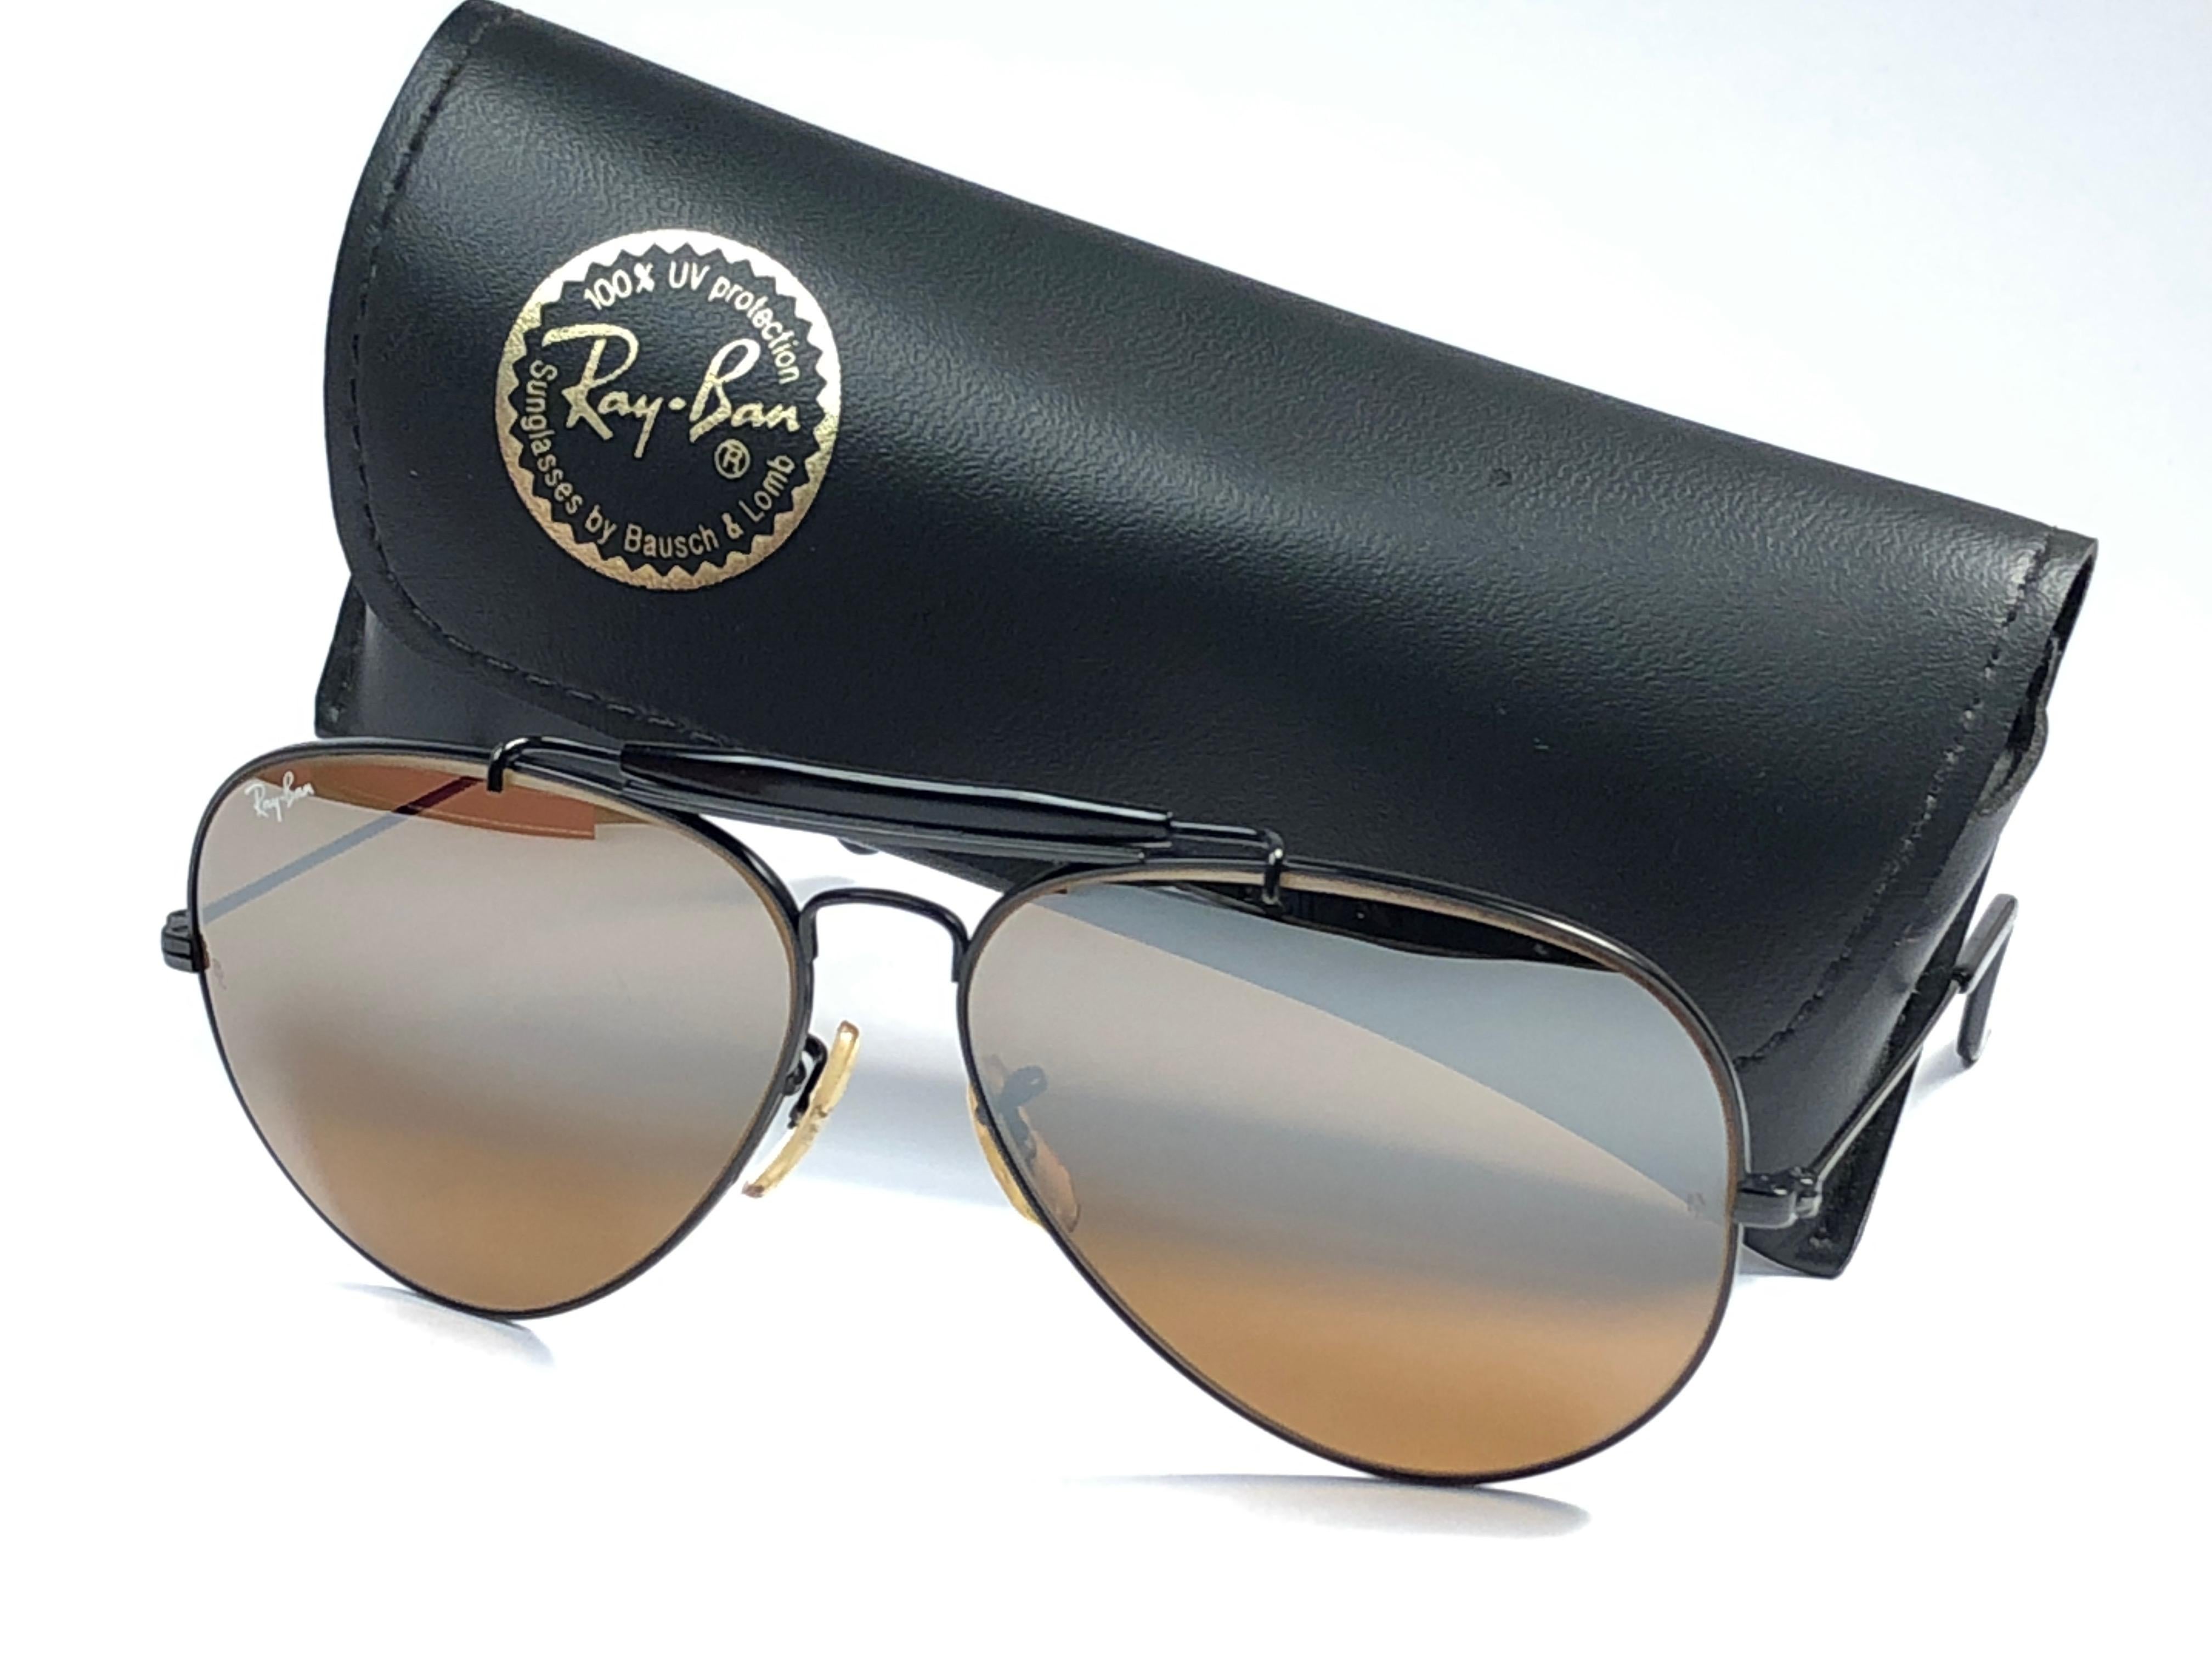 Mint Vintage Ray Ban Outdoorsman 62mm with B15 top mirror gradient lenses. B&L etched  in both lenses. Comes with its original Ray Ban B&L case. 

This pair may have minor sign of wear on frame and lenses due to nearly 40 years of storage. 
